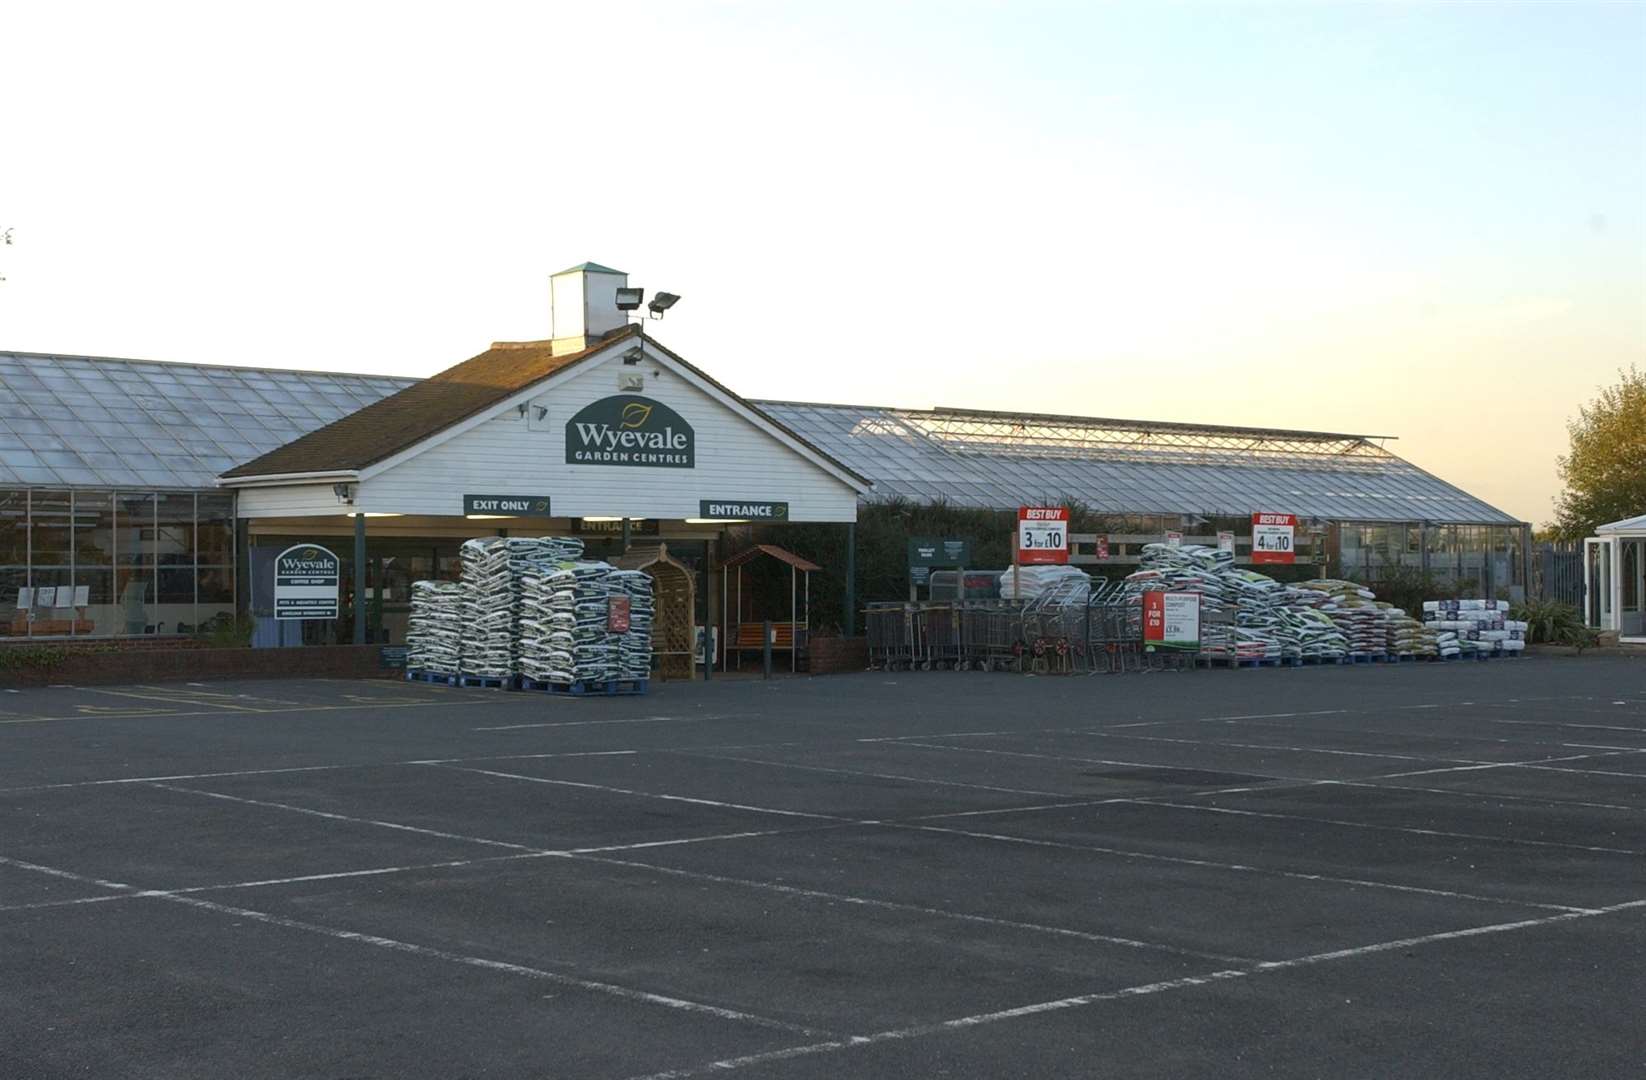 Wyevale has been going through a gradual sell-off process for more than a year